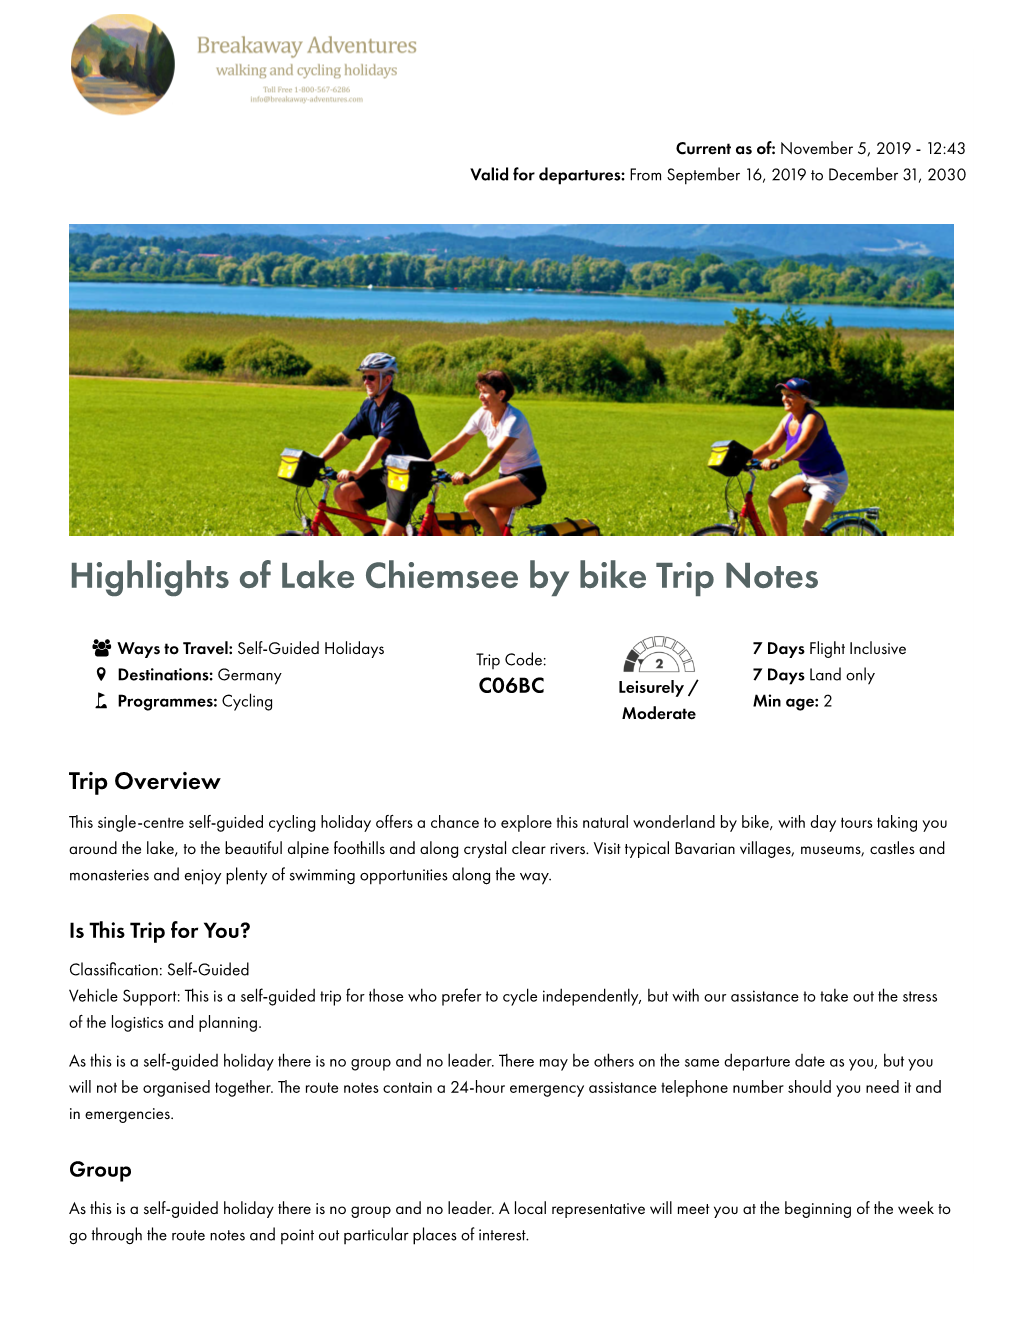 Highlights of Lake Chiemsee by Bike Trip Notes